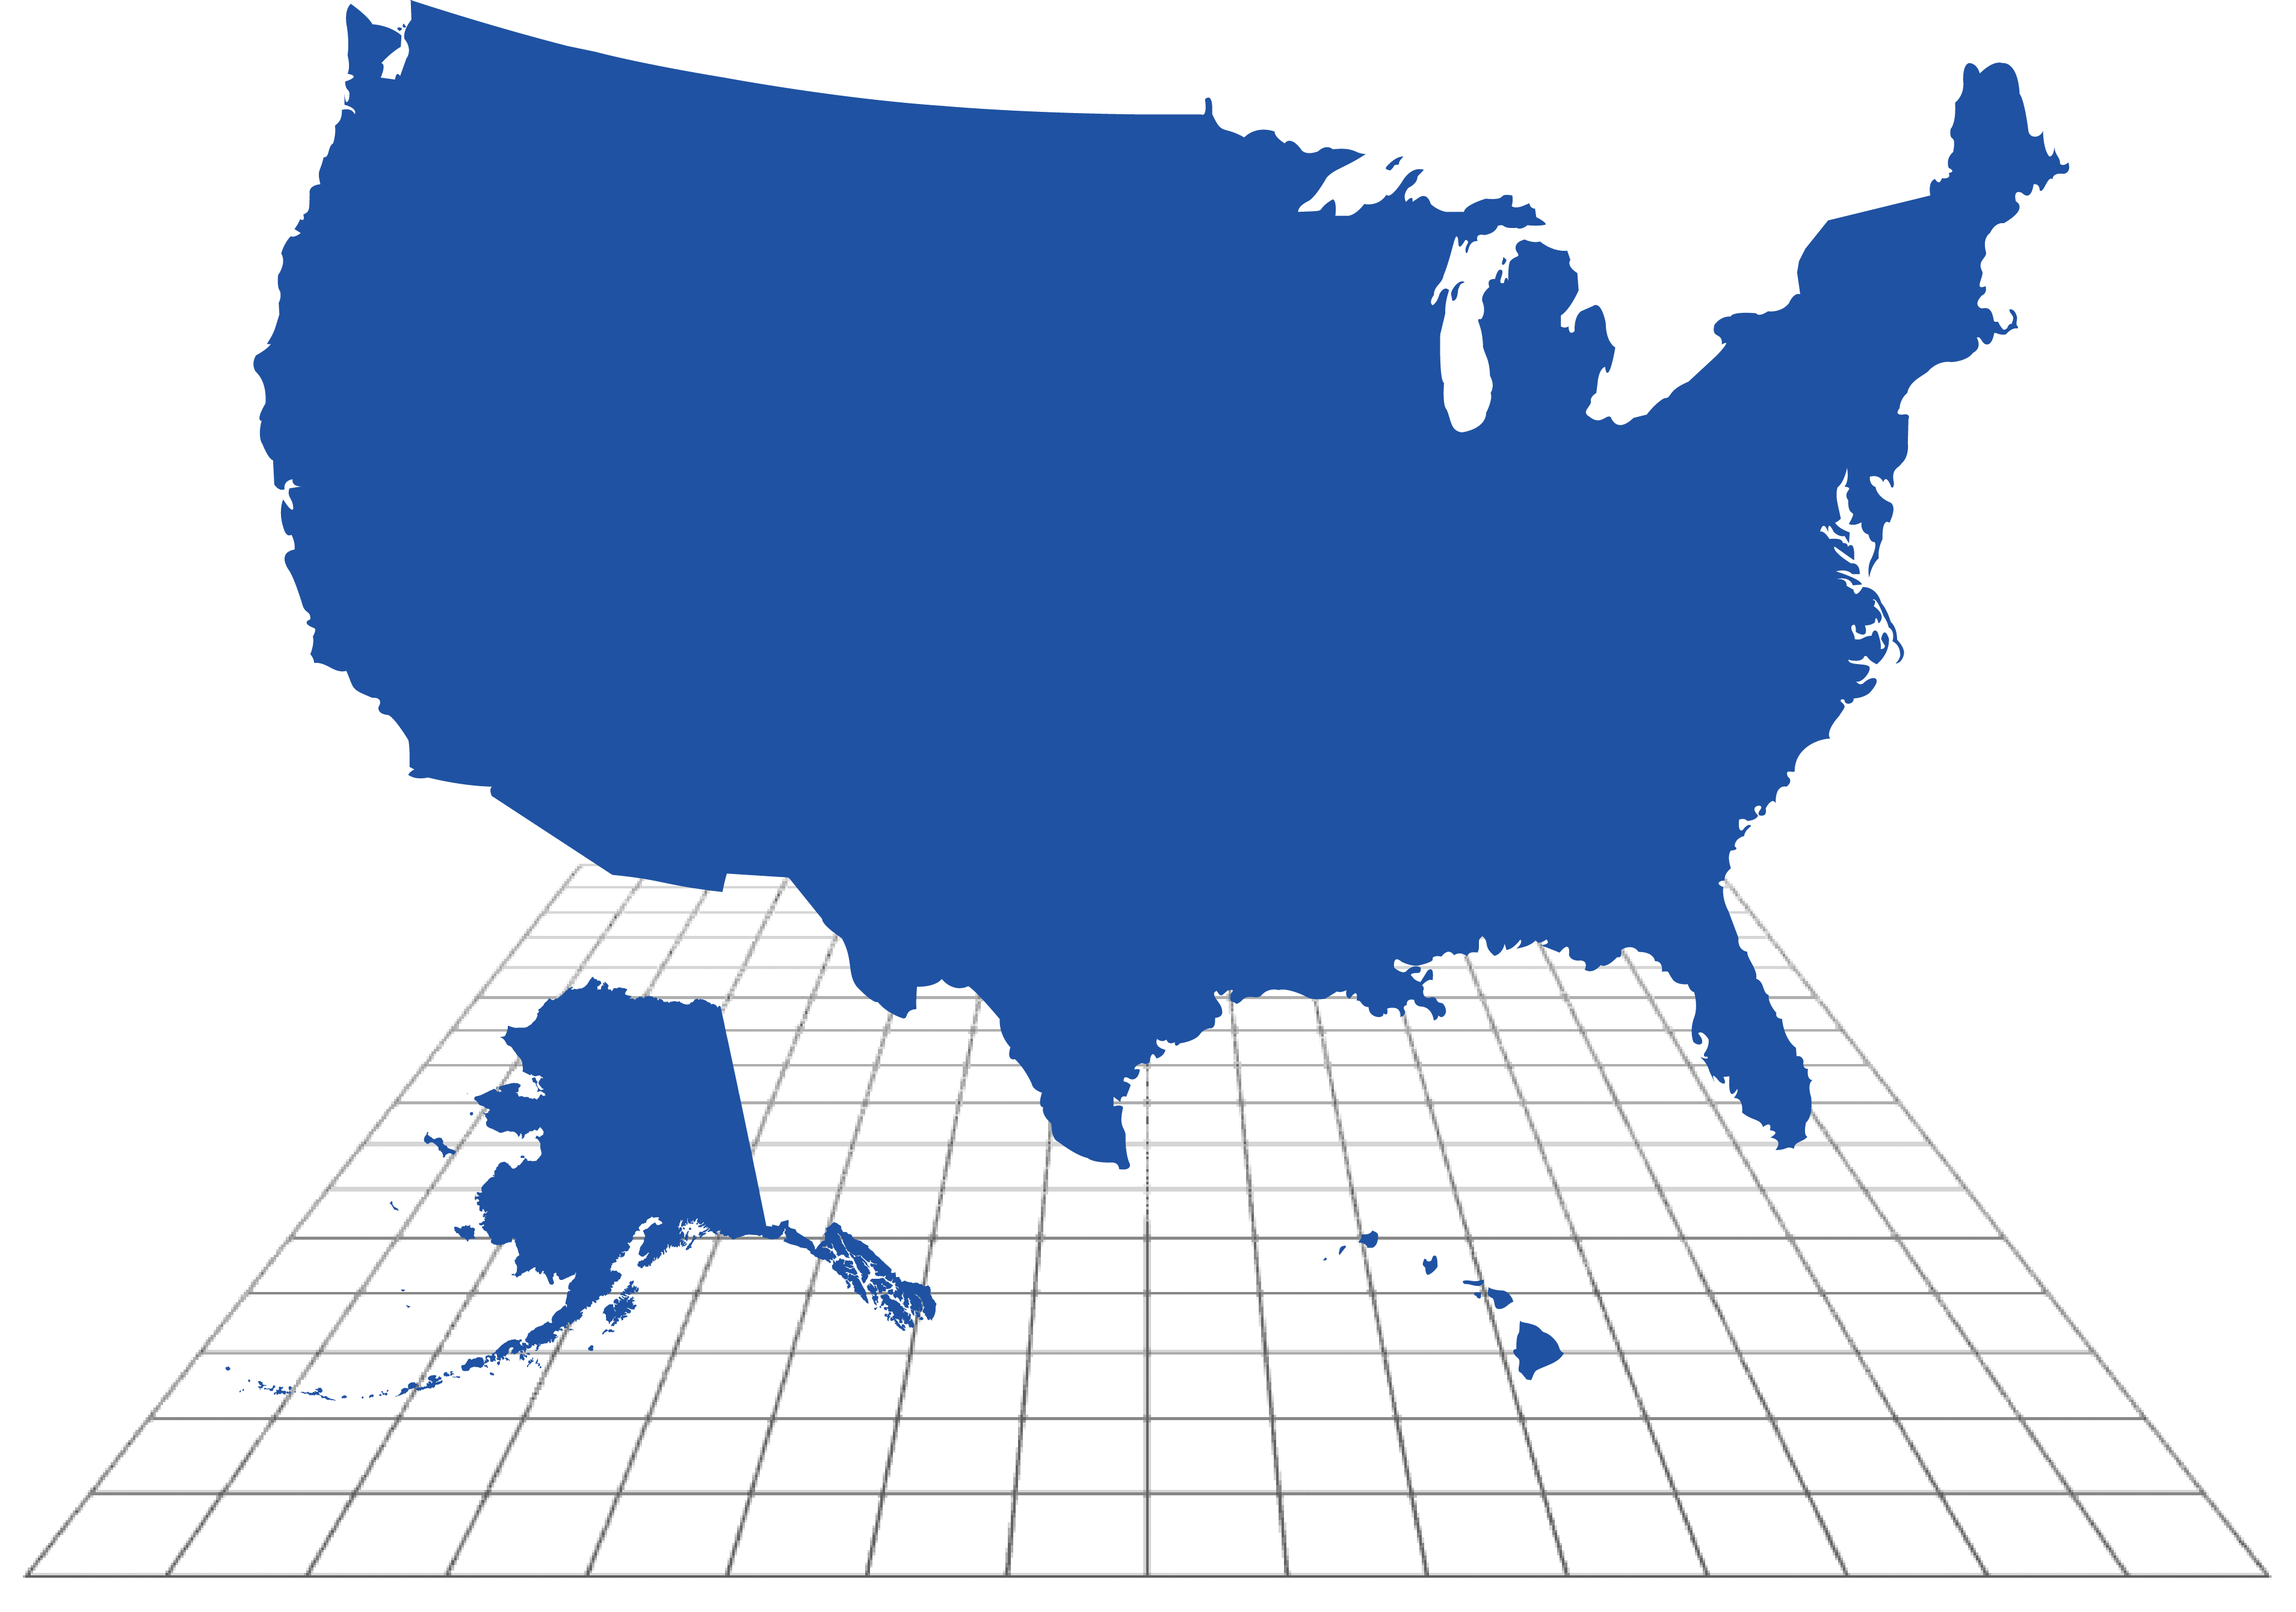 Blue silhouette of the United States floating over an angled grid.